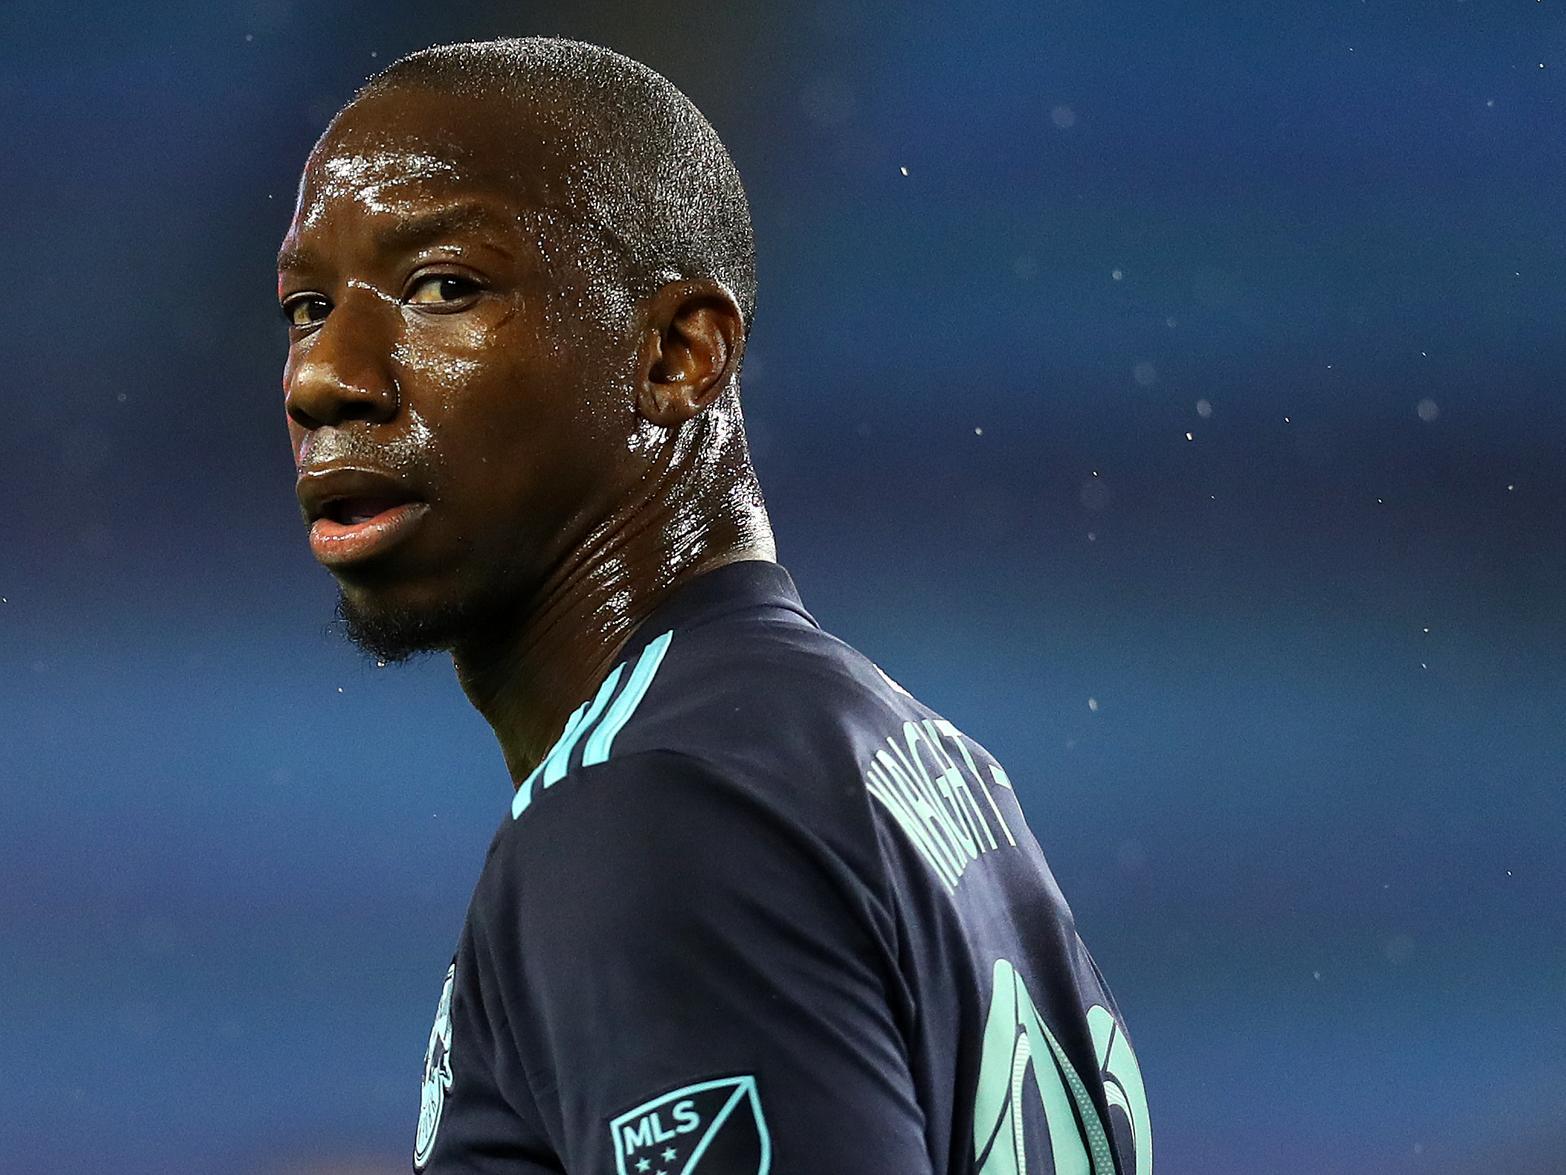 Largely unproven in the English leagues, Wright-Phillips has an eye-catching record in the MLS - and is now a free agent after leaving New York Red Bulls. Could a return to home shores prove appealing?